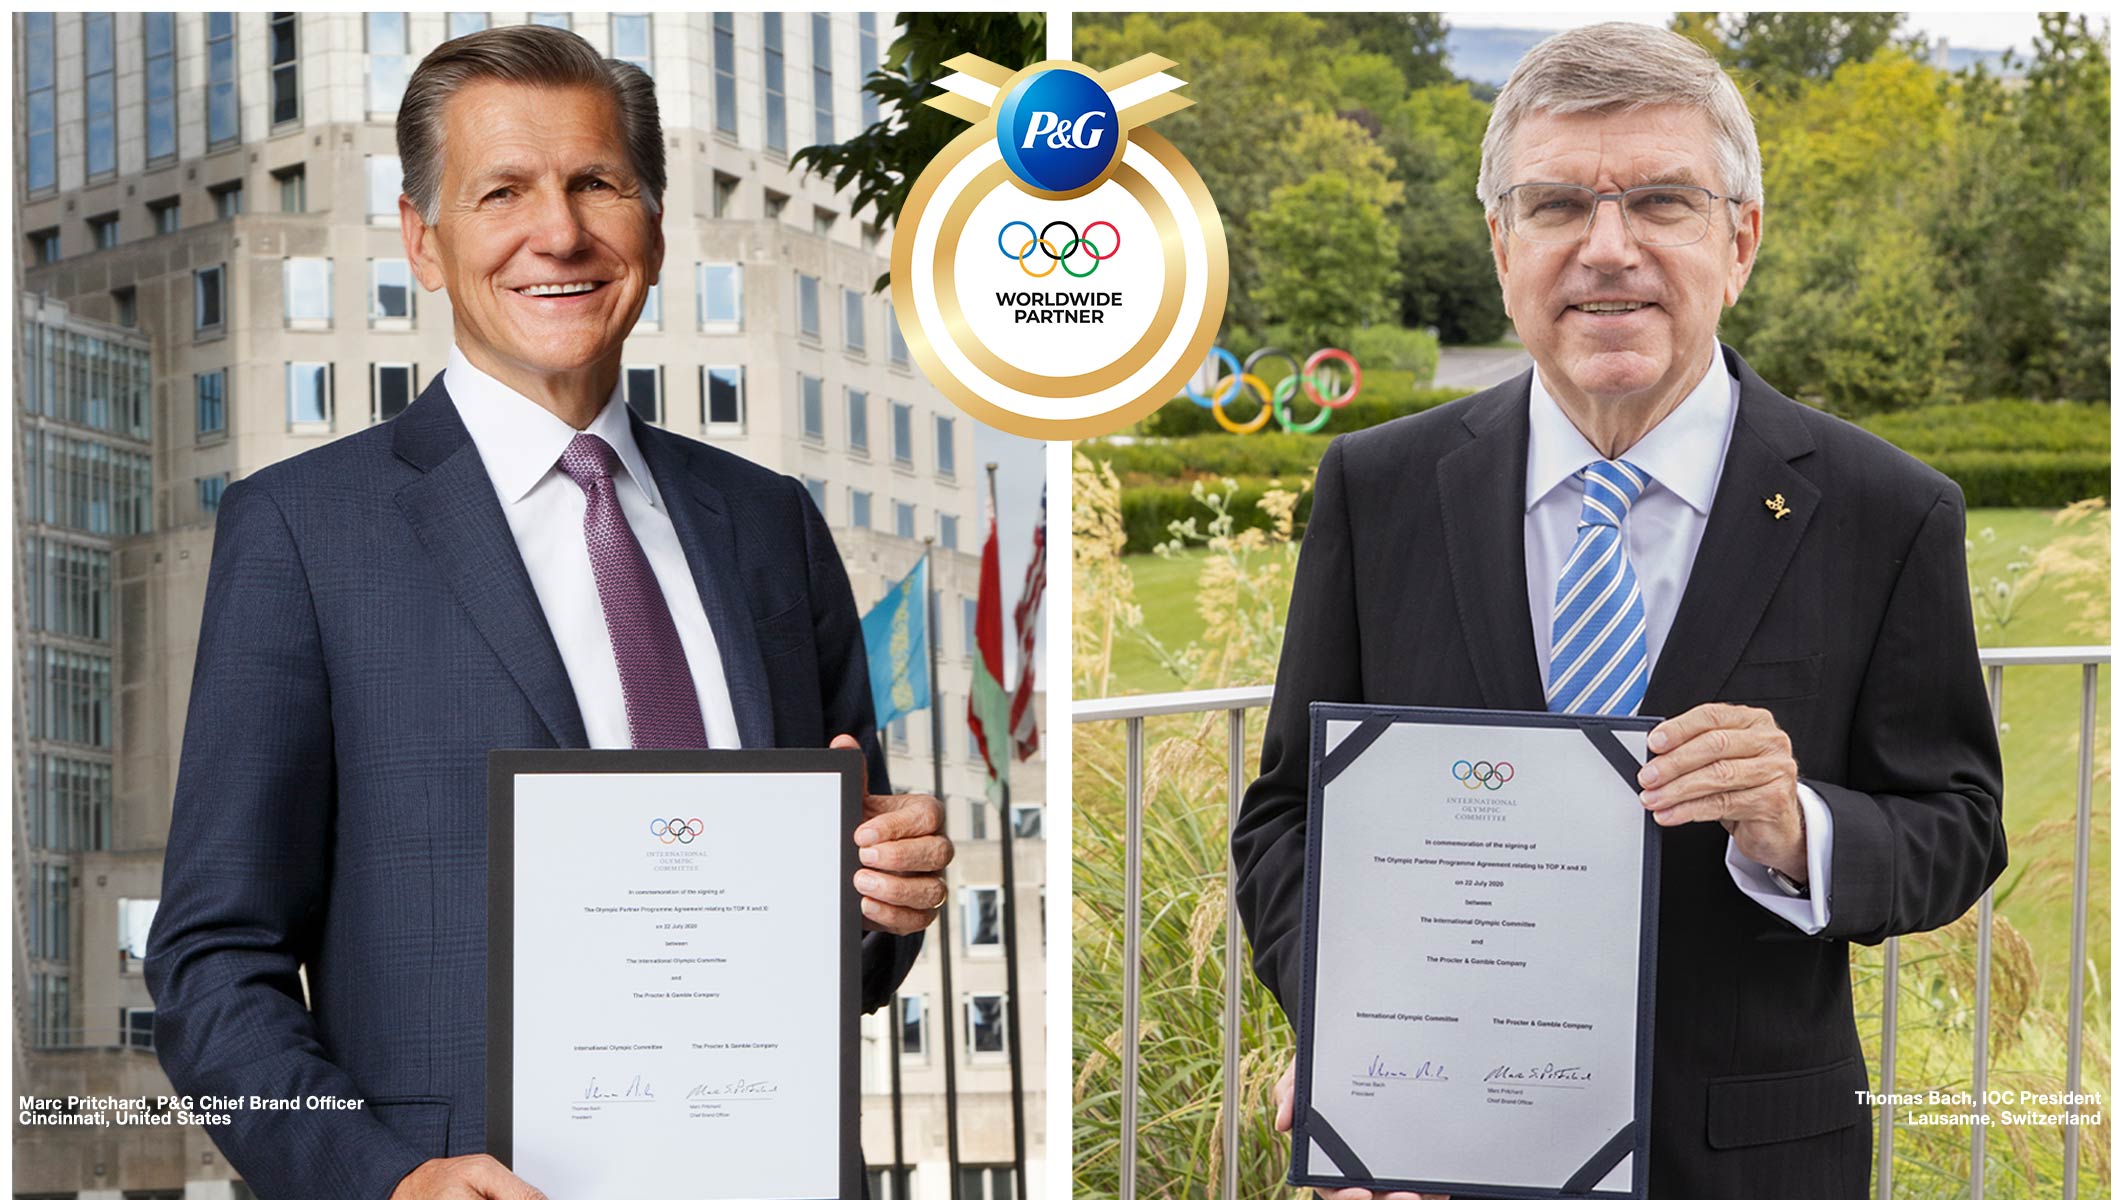 The Ioc And Procter Gamble Announce An Extension To Their Worldwide Olympic Partnership Through To 28 Olympic News